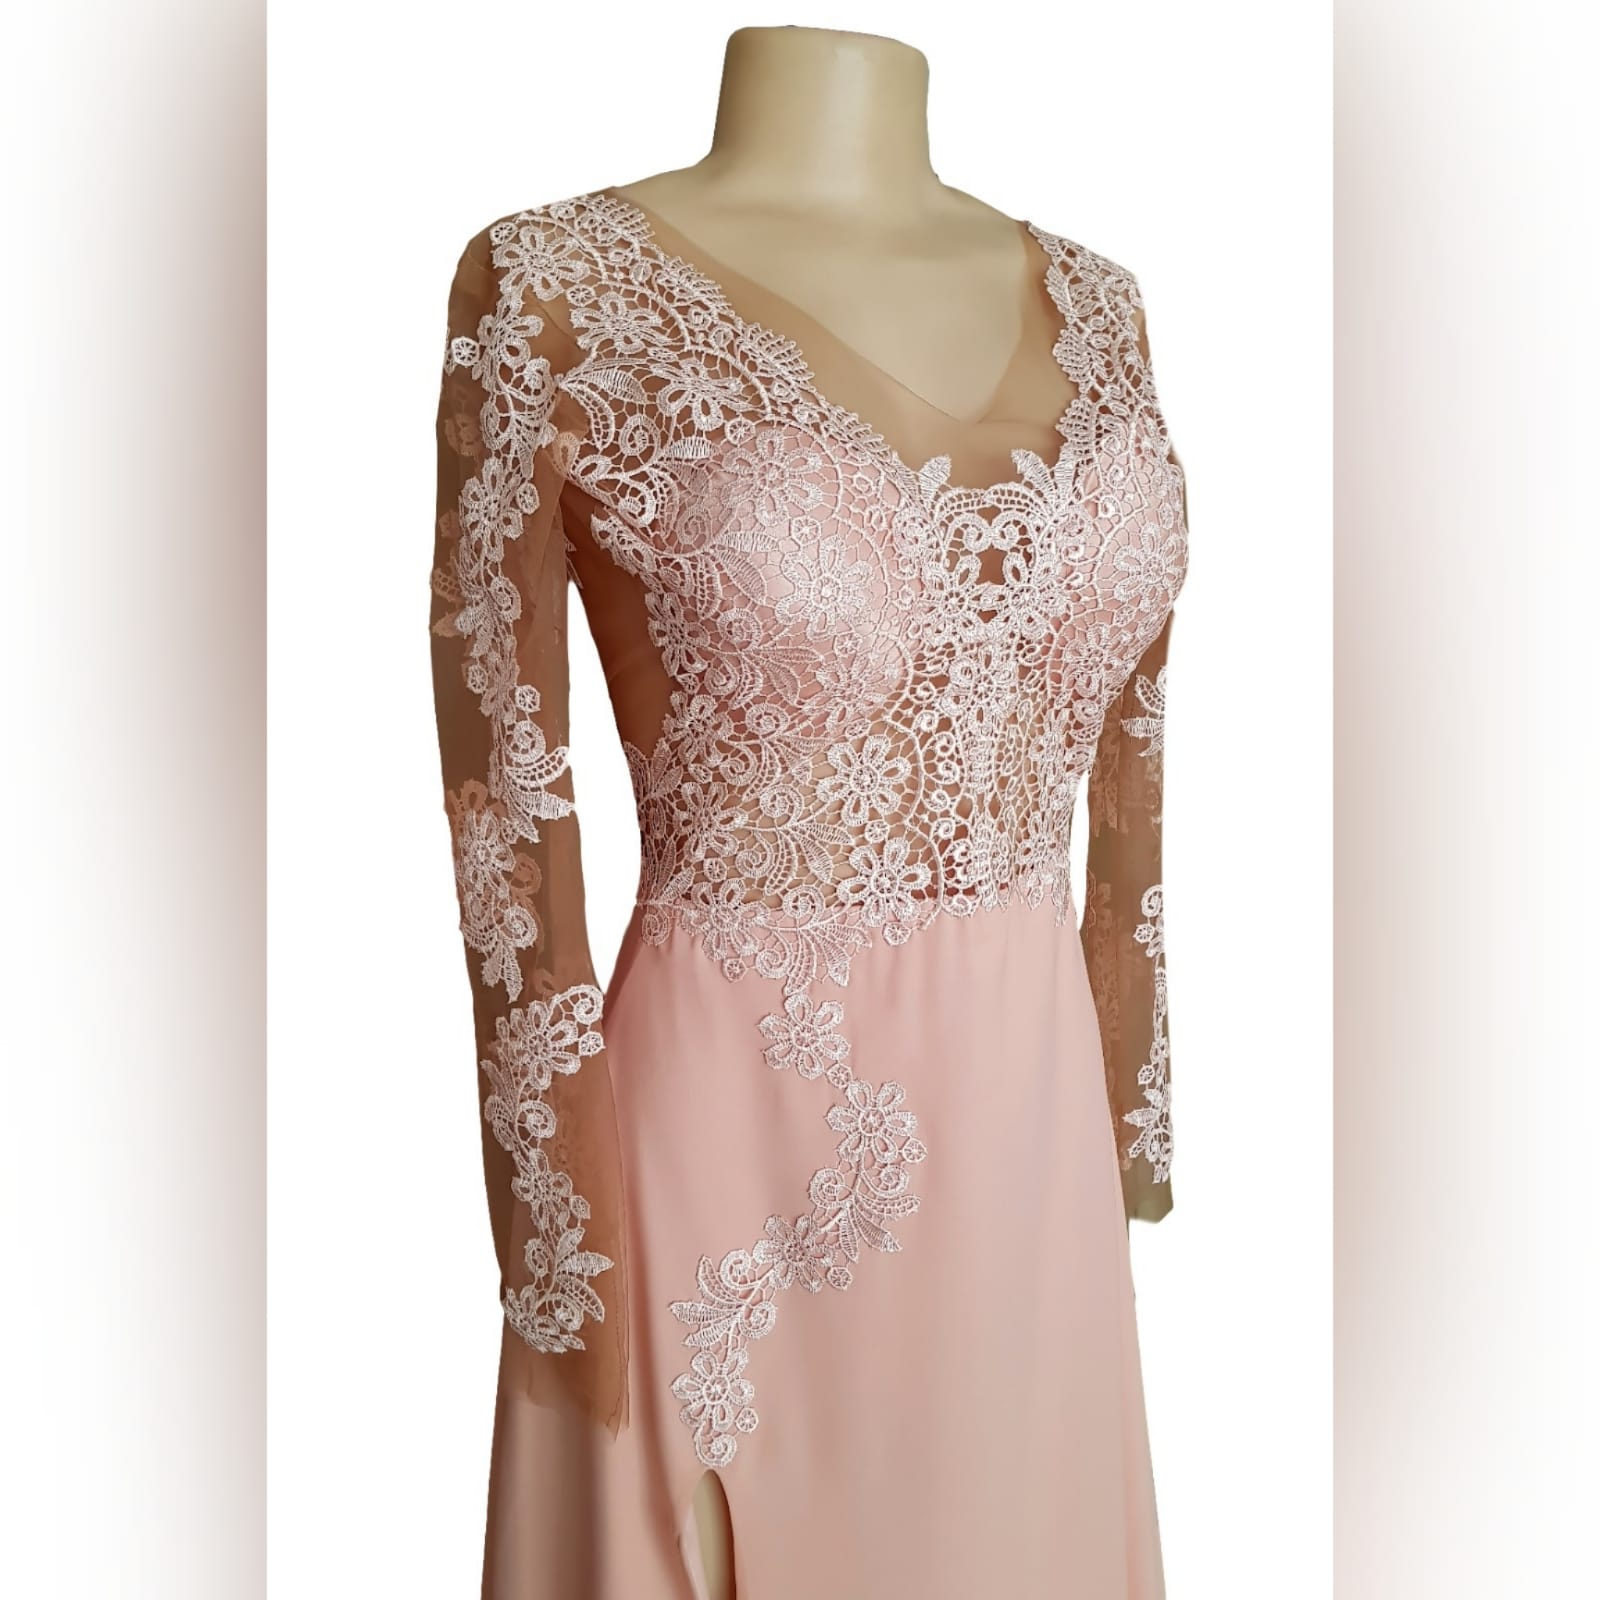 Gorgeous ceremony dress 6 <blockquote>each time a woman stands up for herself, she stands up for all women. - maya angelou</blockquote> this gorgeous ceremony dress was created especially for my client as her prom dress. A pale pink dress made with soft flowy chiffon with a little train and a slit. With a translucent bodice, and sleeves detailed with lace. Back finished with satin buttons for that extra detail.